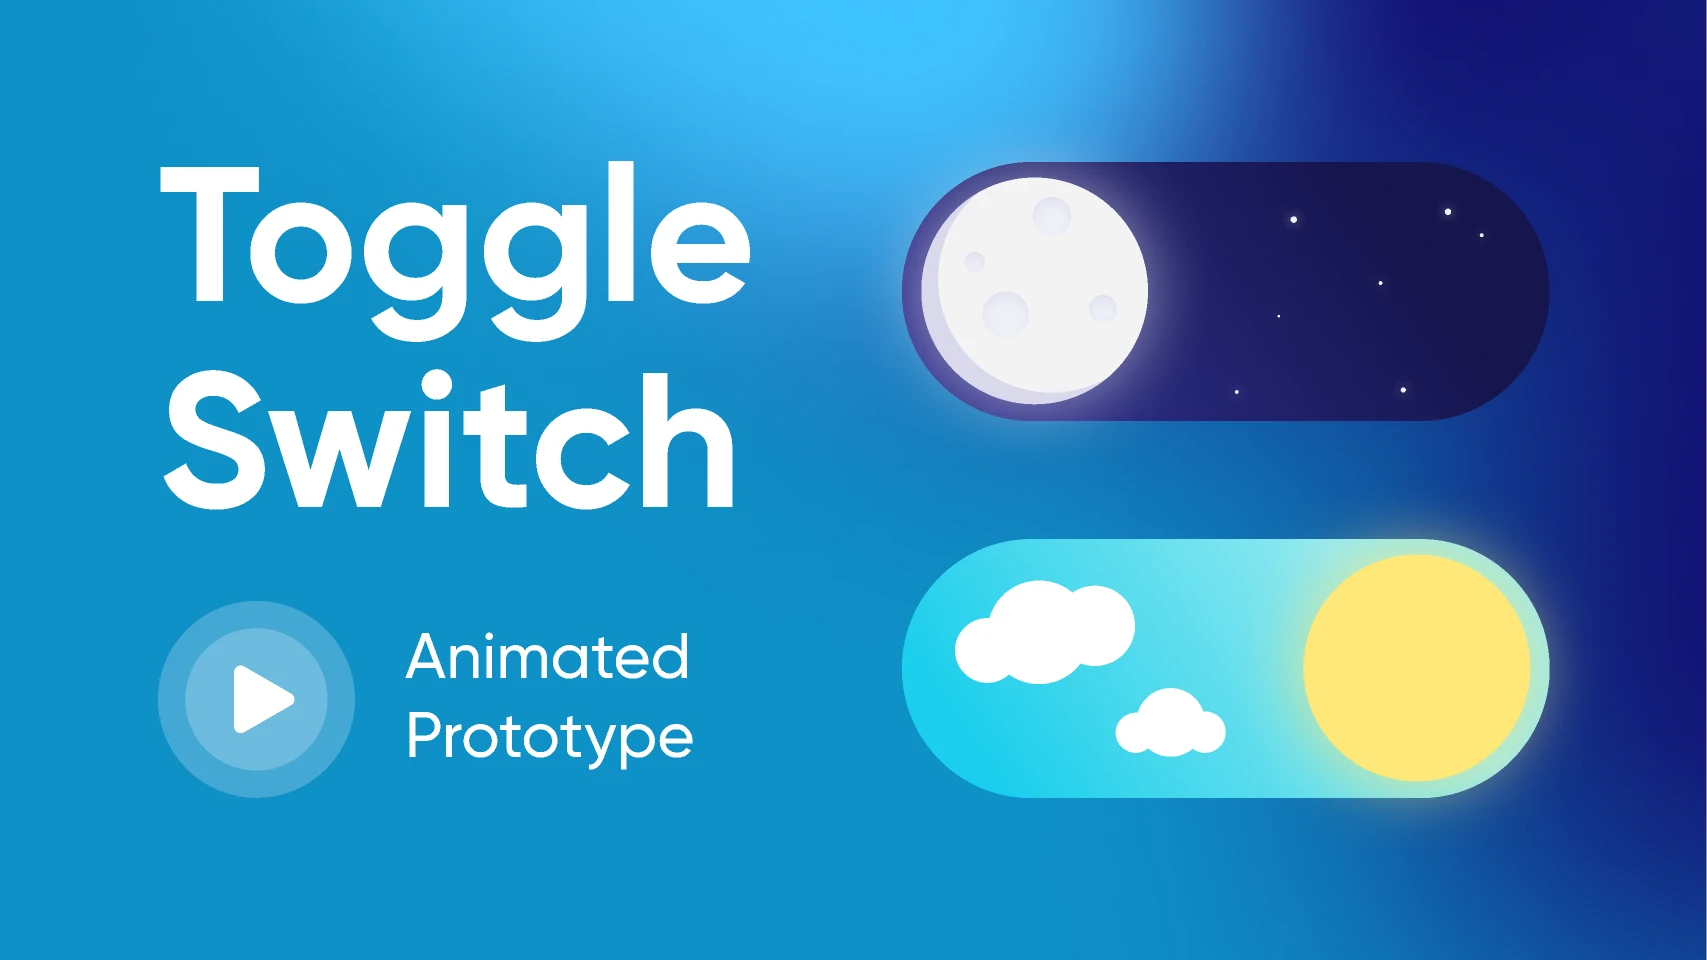 Toggle Switch Free [CAN EDIT] for Figma and Adobe XD